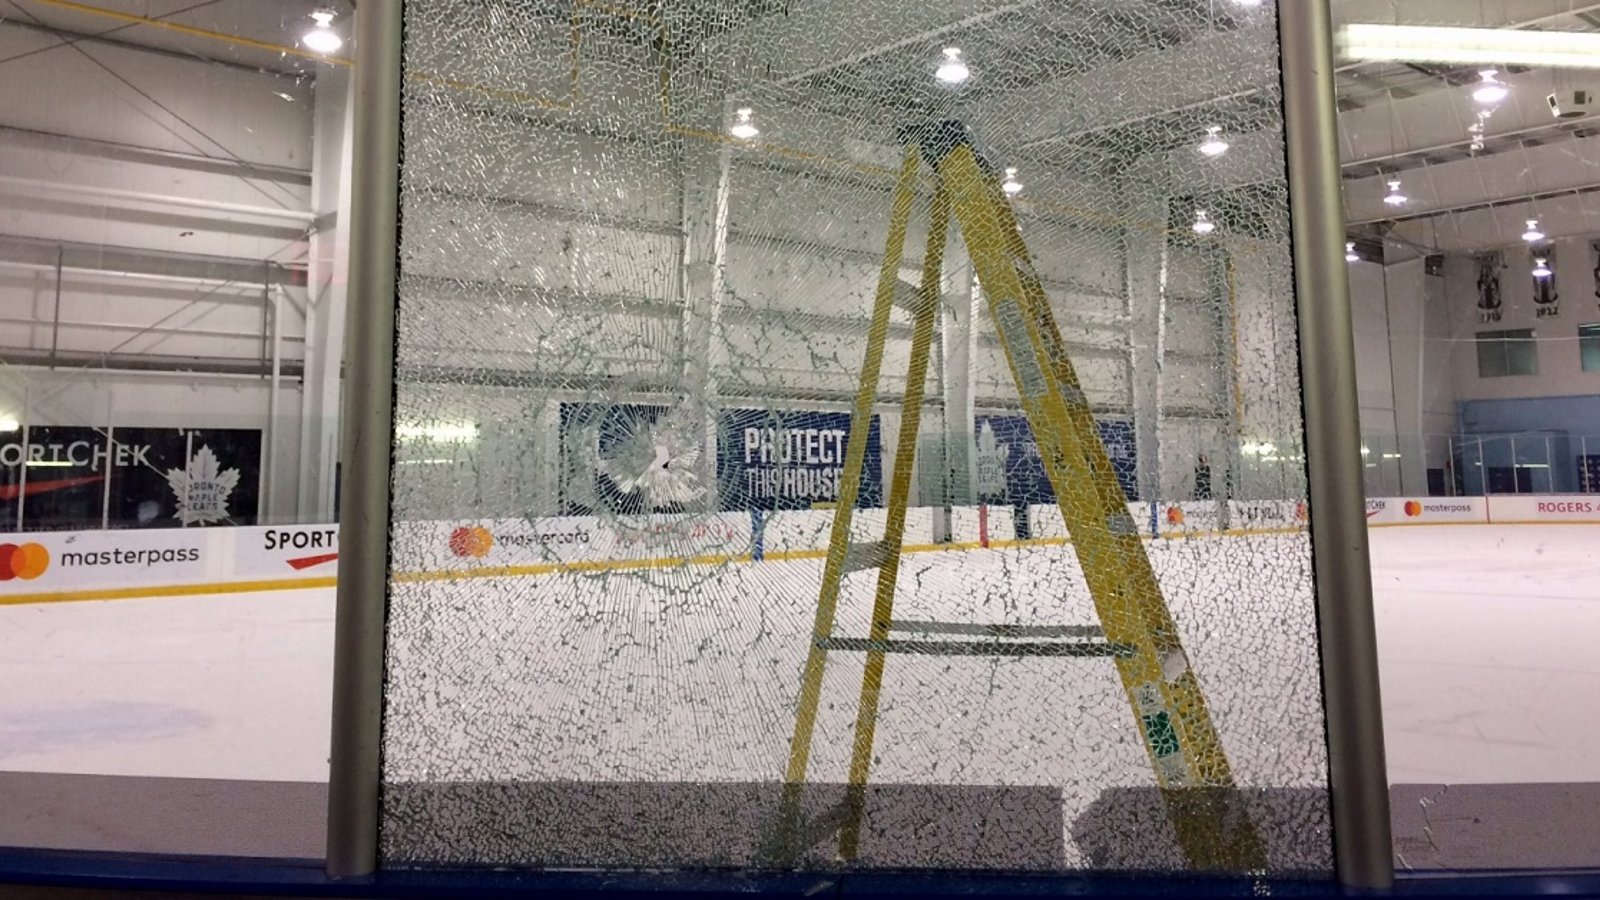 Auston Matthews fires off a rocket and shatters glass in training camp.